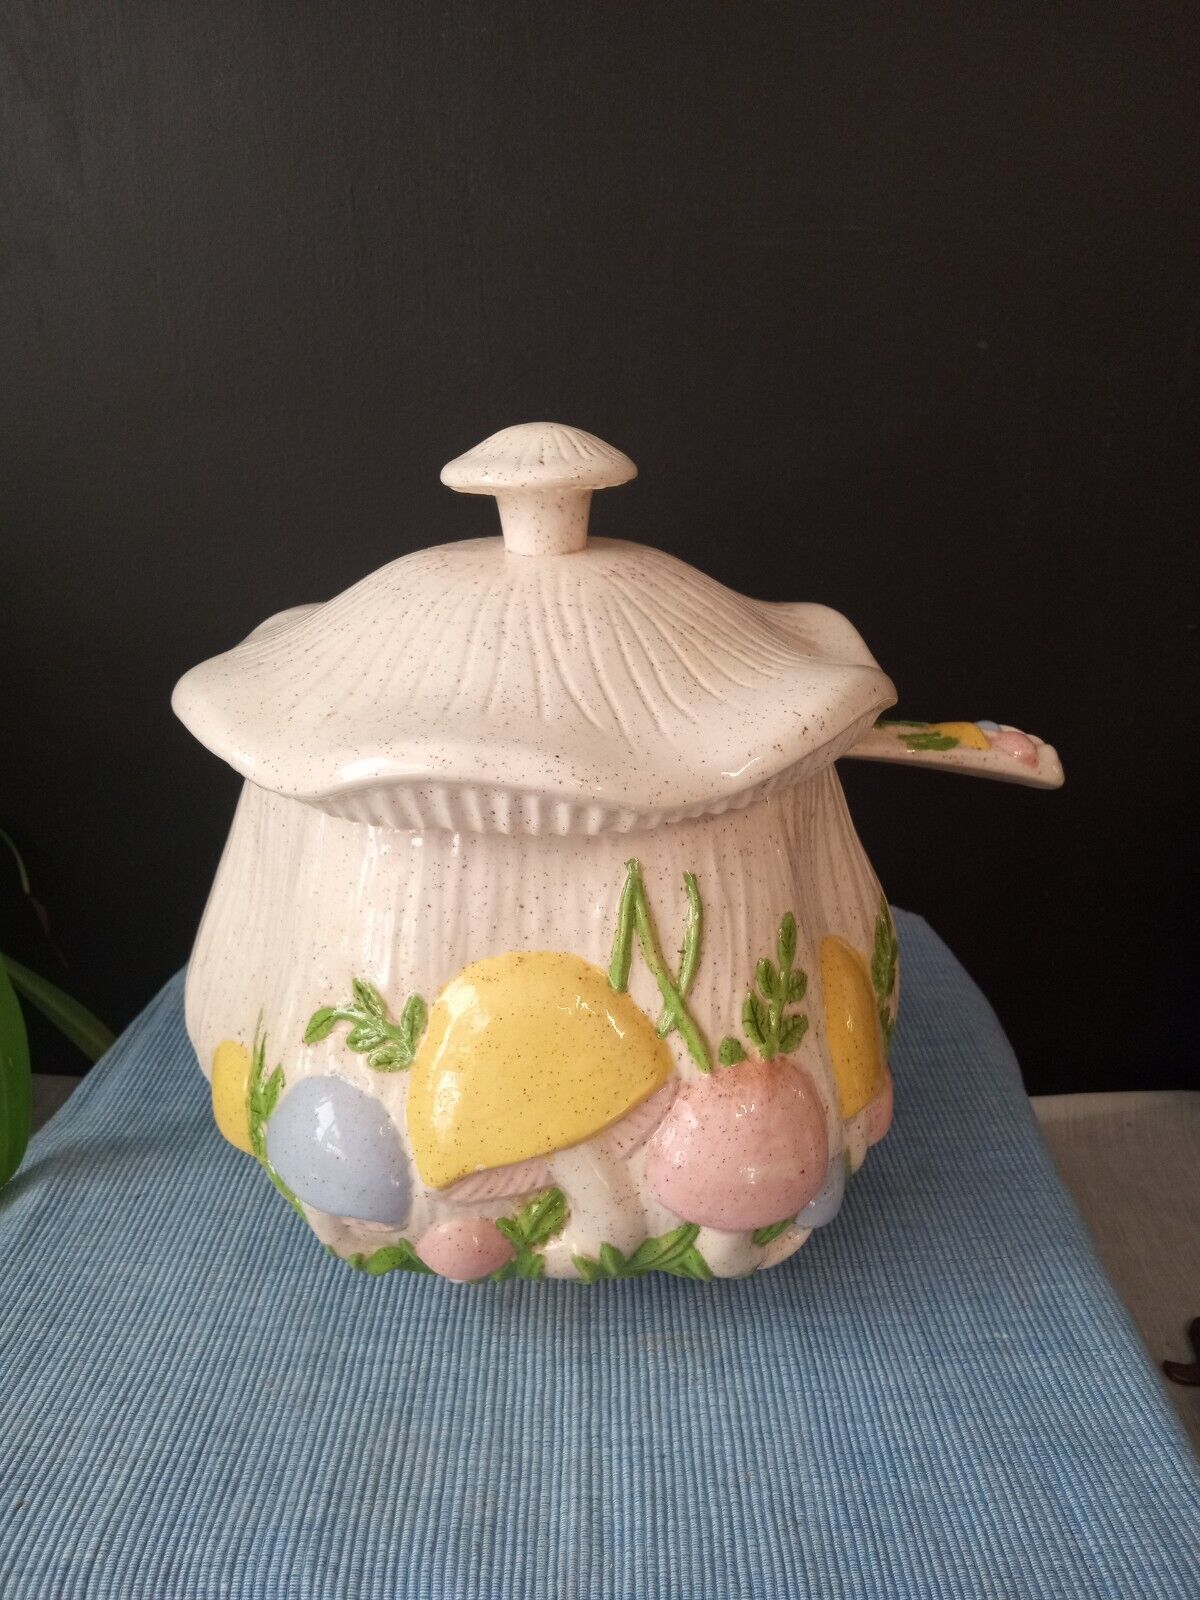 Vtg Arnel\'s Mushroom Soup Tureen With Lid And Ladle Hand Painted Pastel Colors